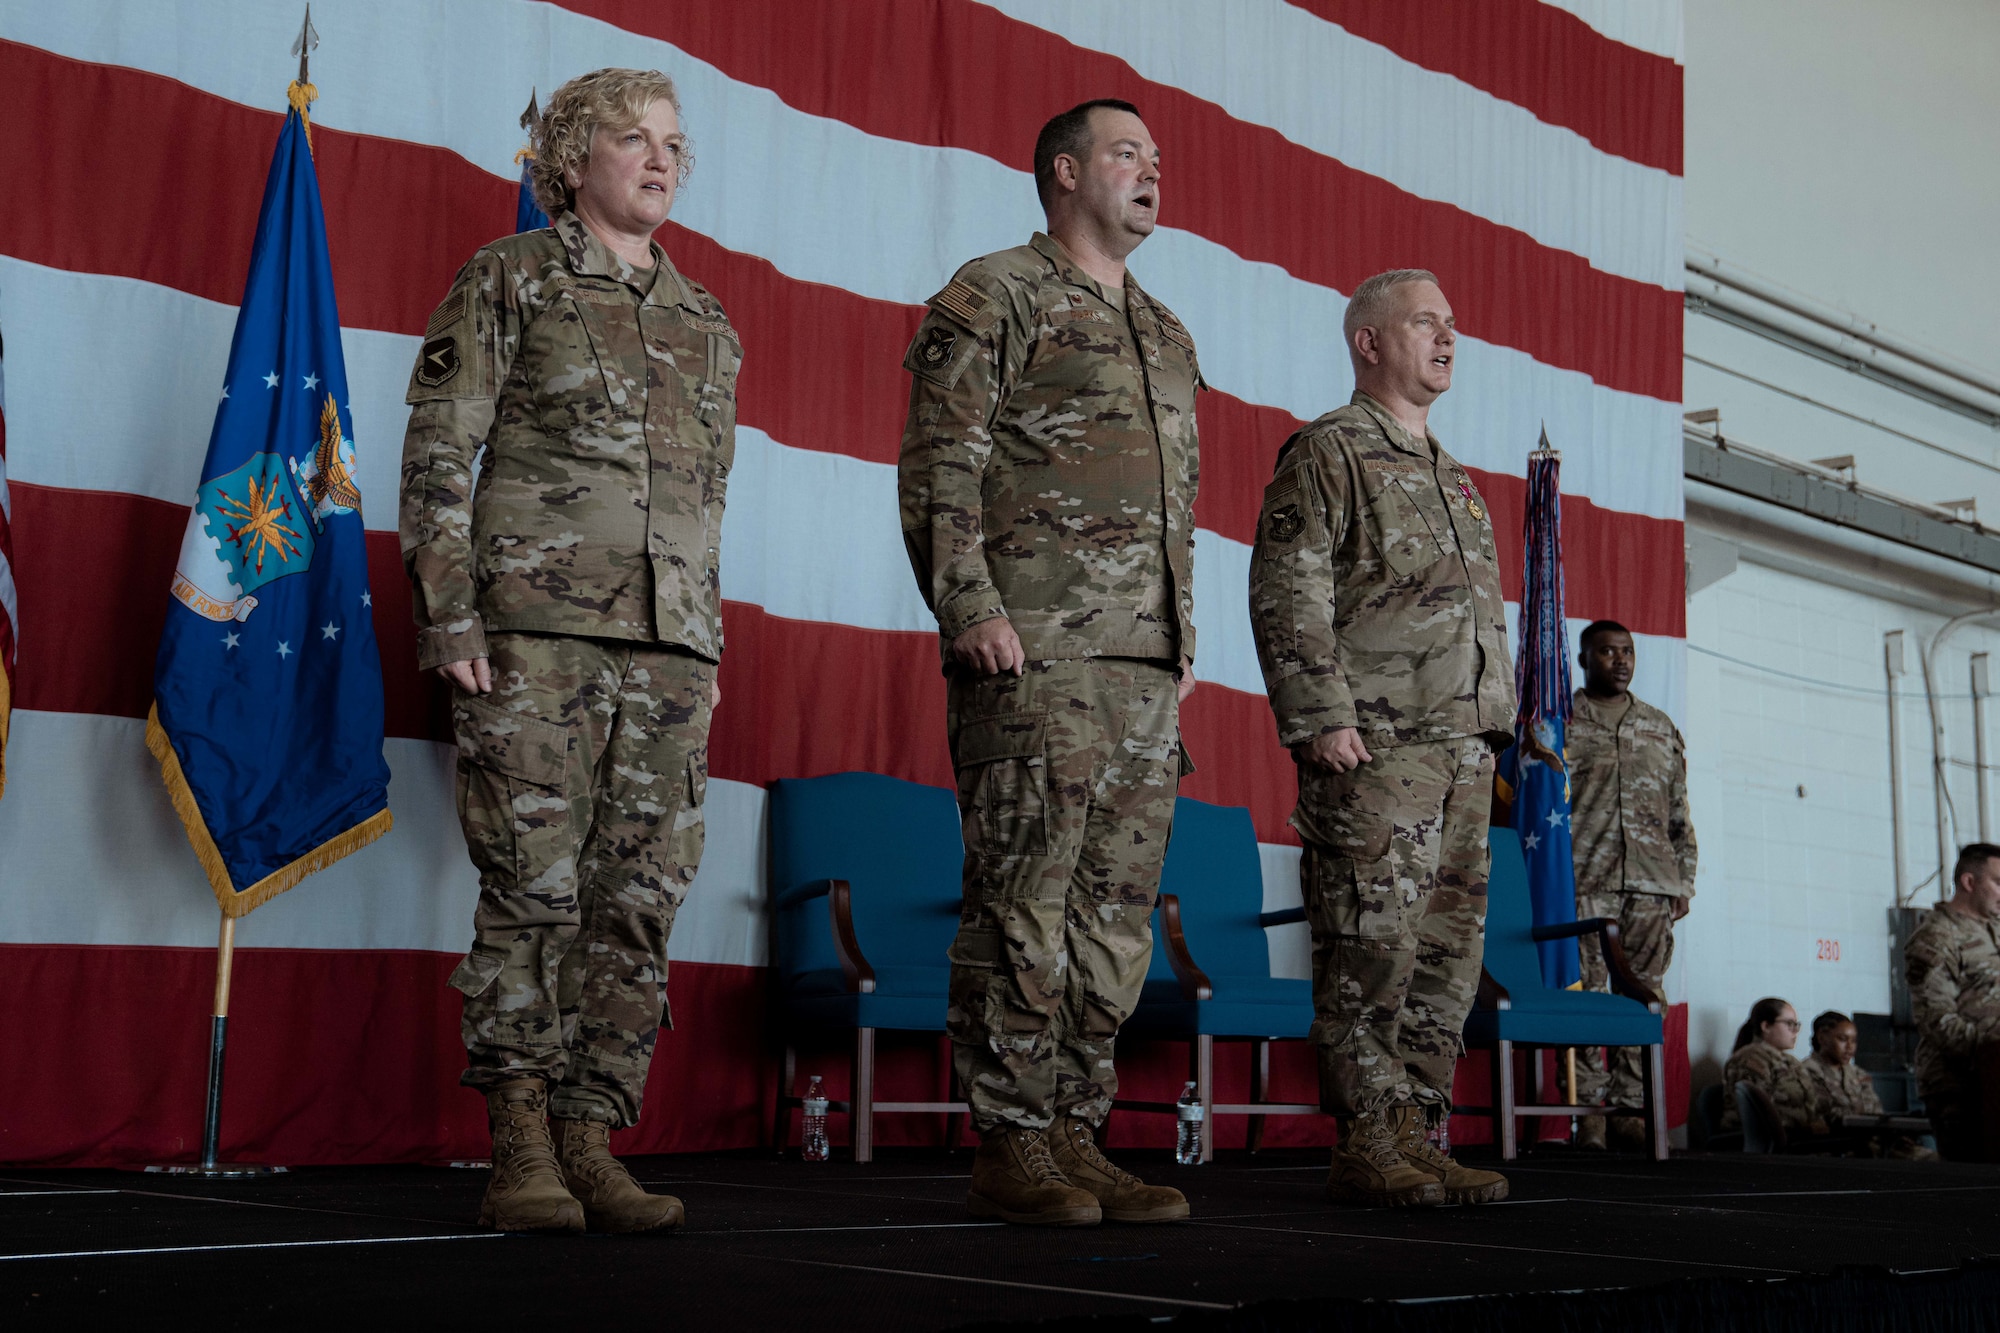 Commanders from the 22nd Air Force and 94th Airlift Wing stand at attention on stage during a change of command ceremony.